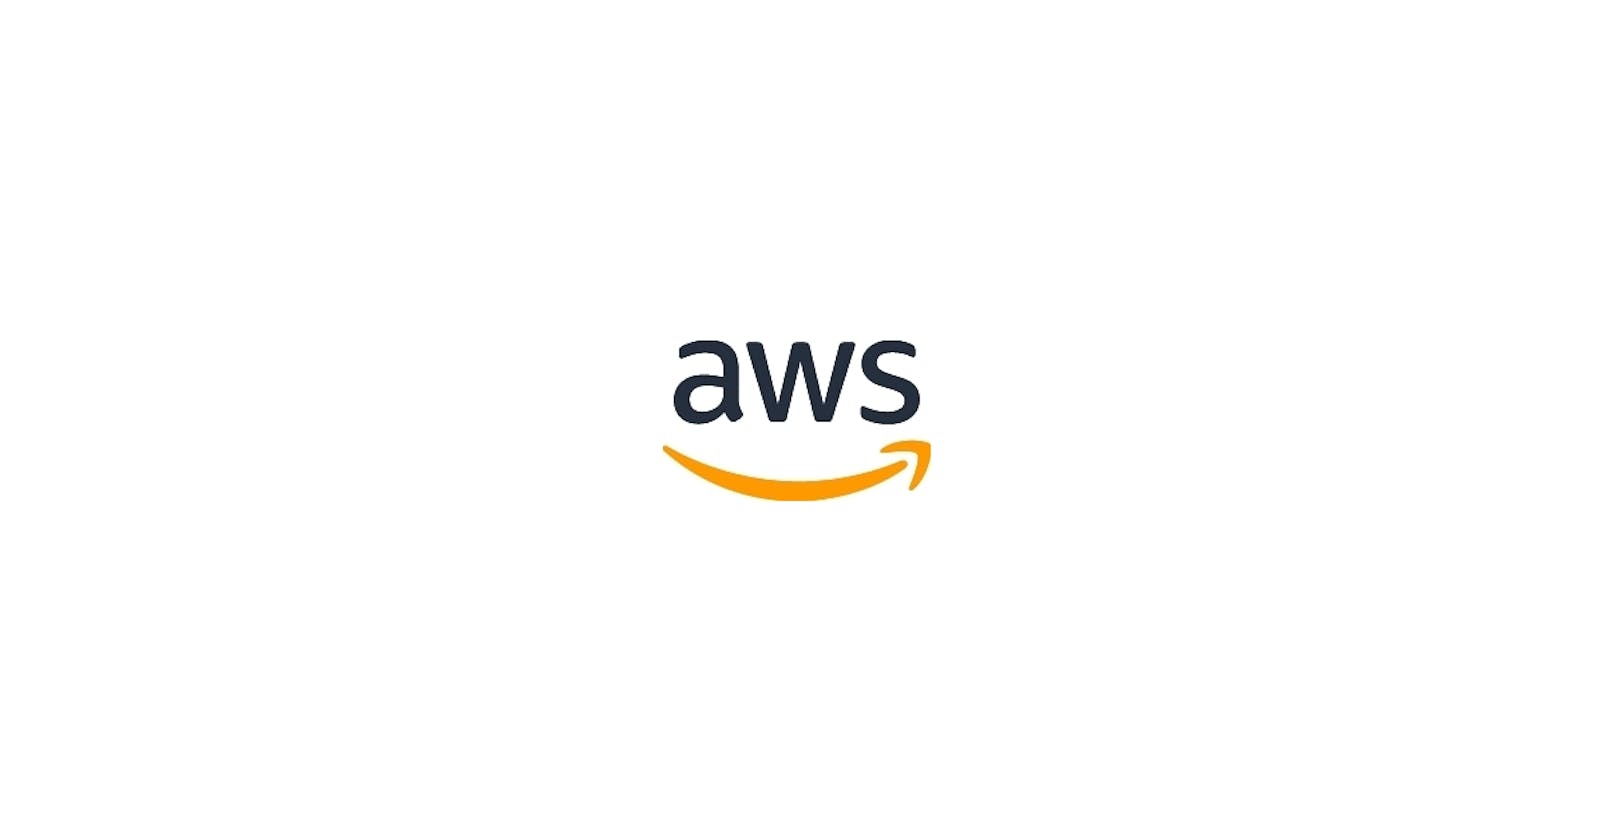 Introduction to Amazon Web Services(AWS)